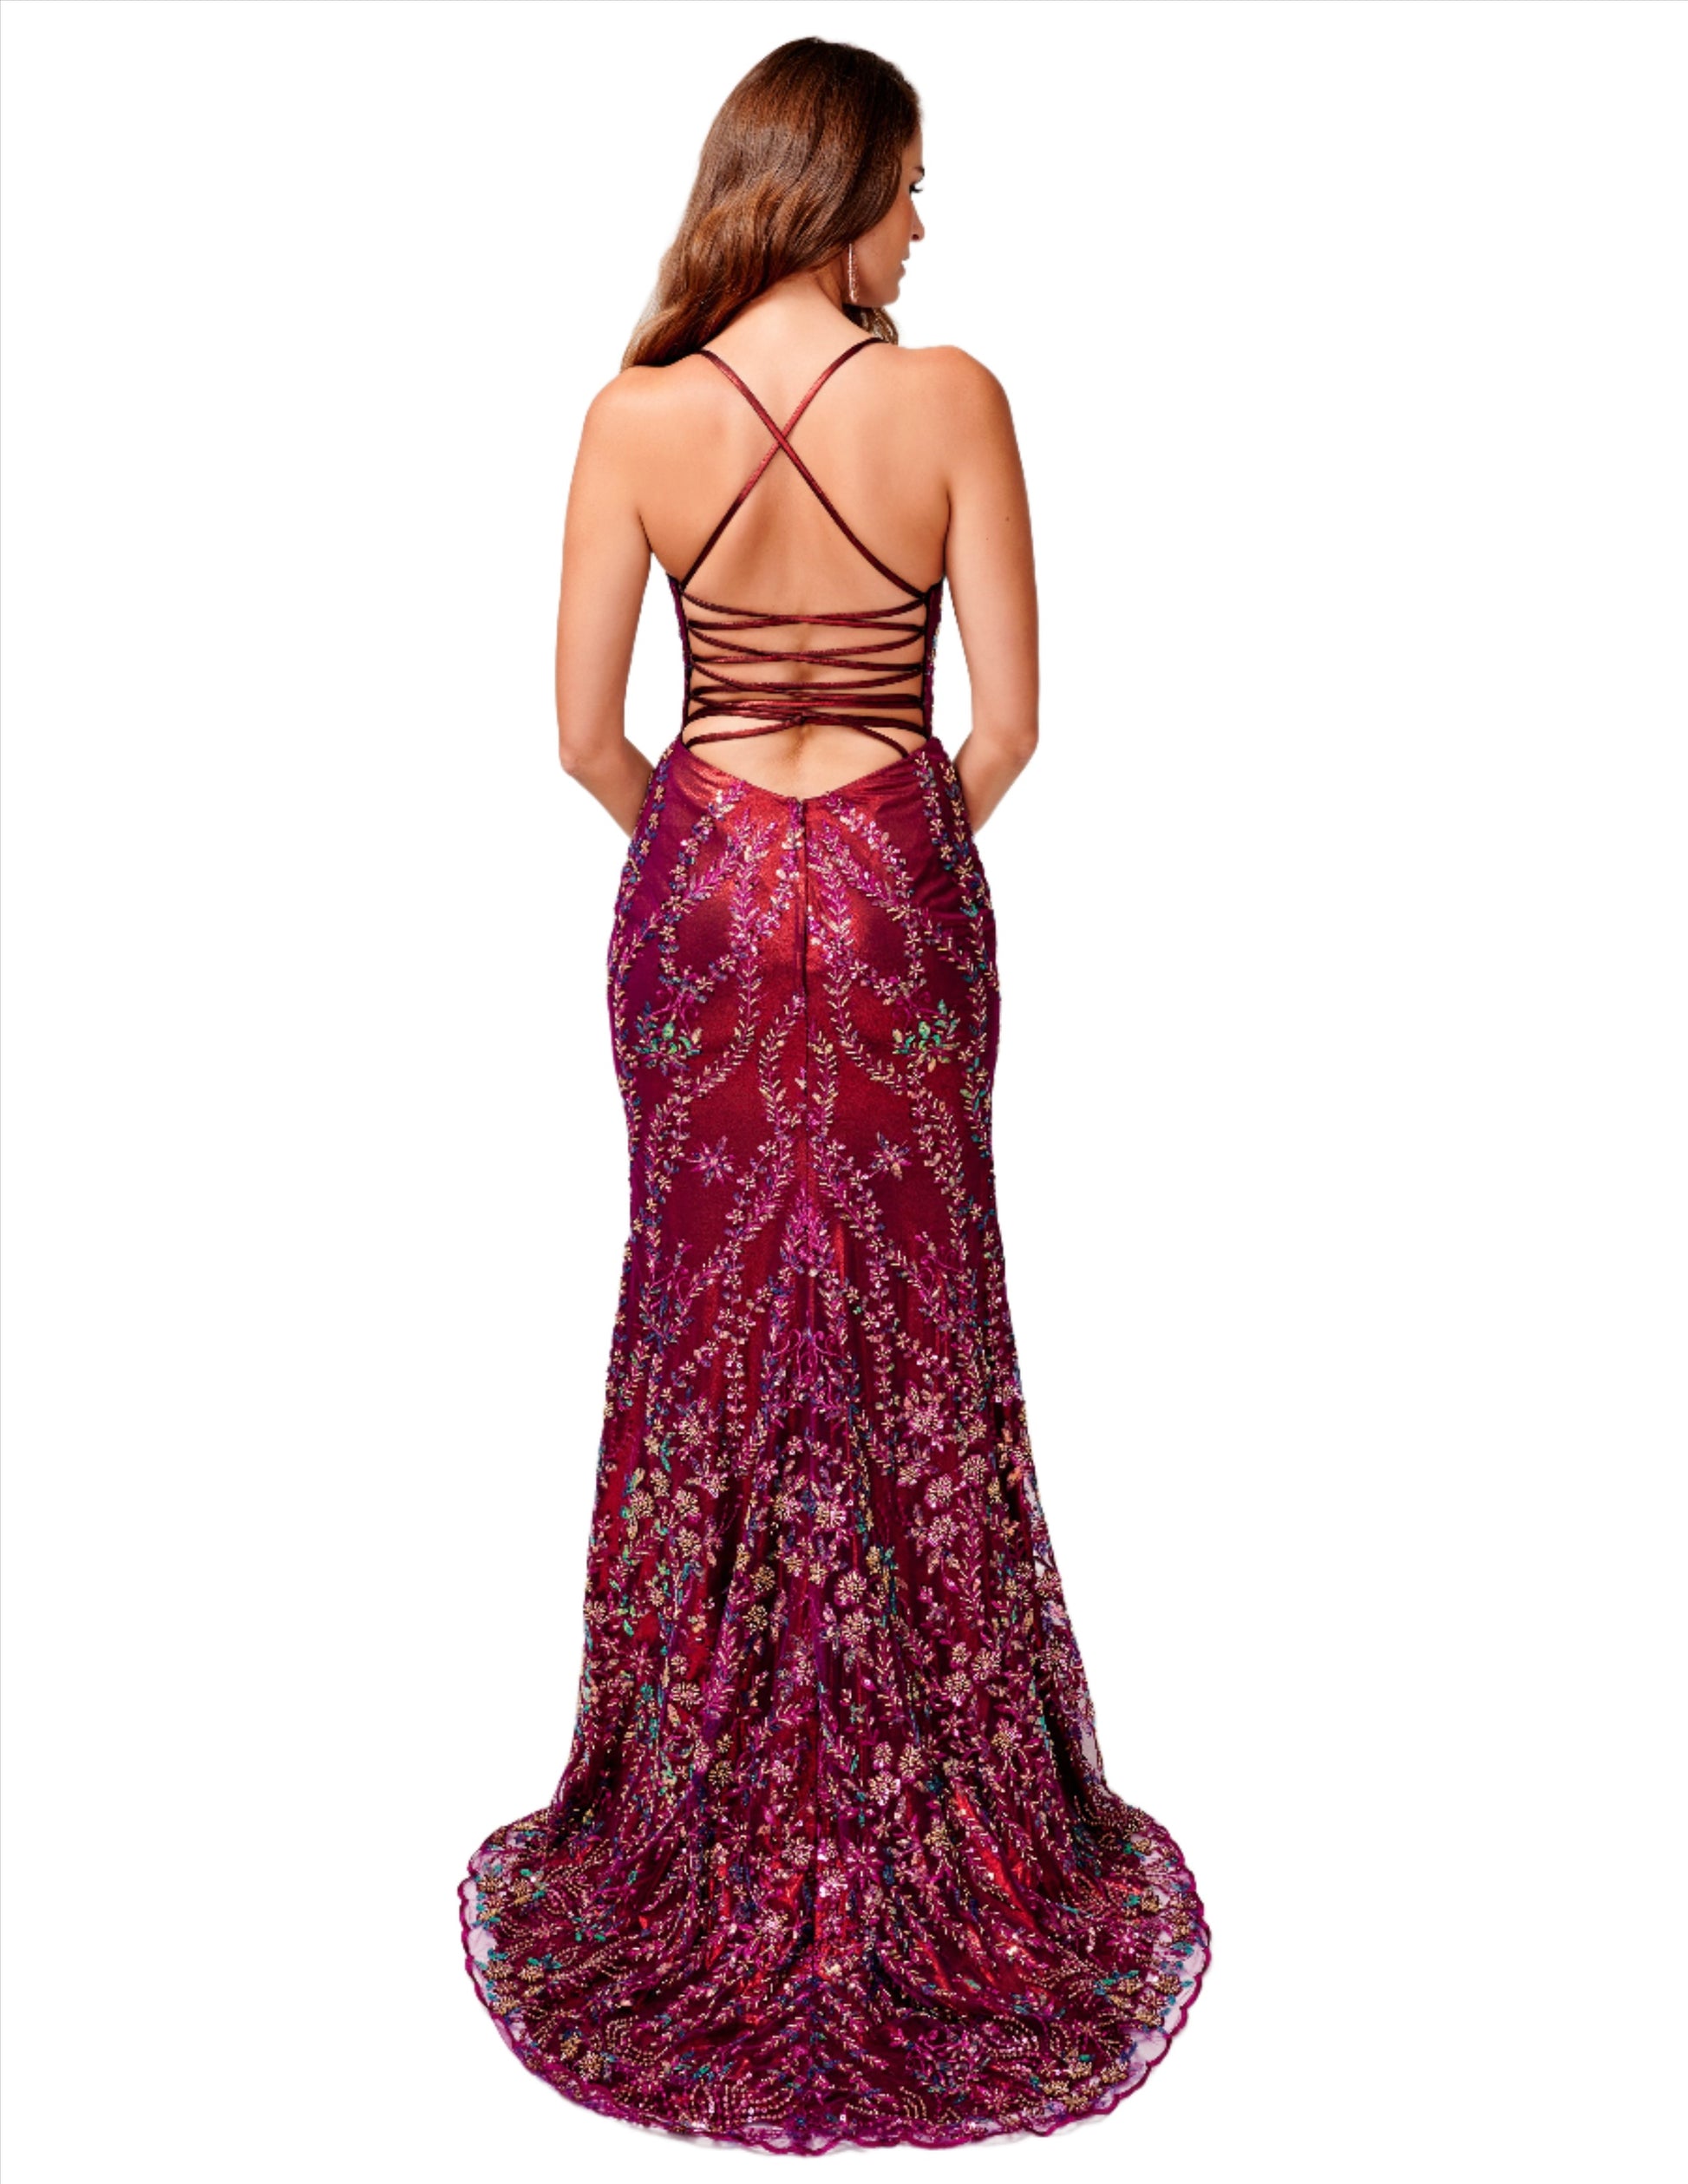 <p data-mce-fragment="1">Nina Canacci 2380 presents a stunning formal dress with a metallic shimmer and intricate beaded detailing. Perfect for prom or an evening event. backless corset dress. Dress to impress with a touch of maroon sophistication.</p> <p data-mce-fragment="1">Sizes: 0, 4, 10</p> <p data-mce-fragment="1">Colors: Maroon</p>